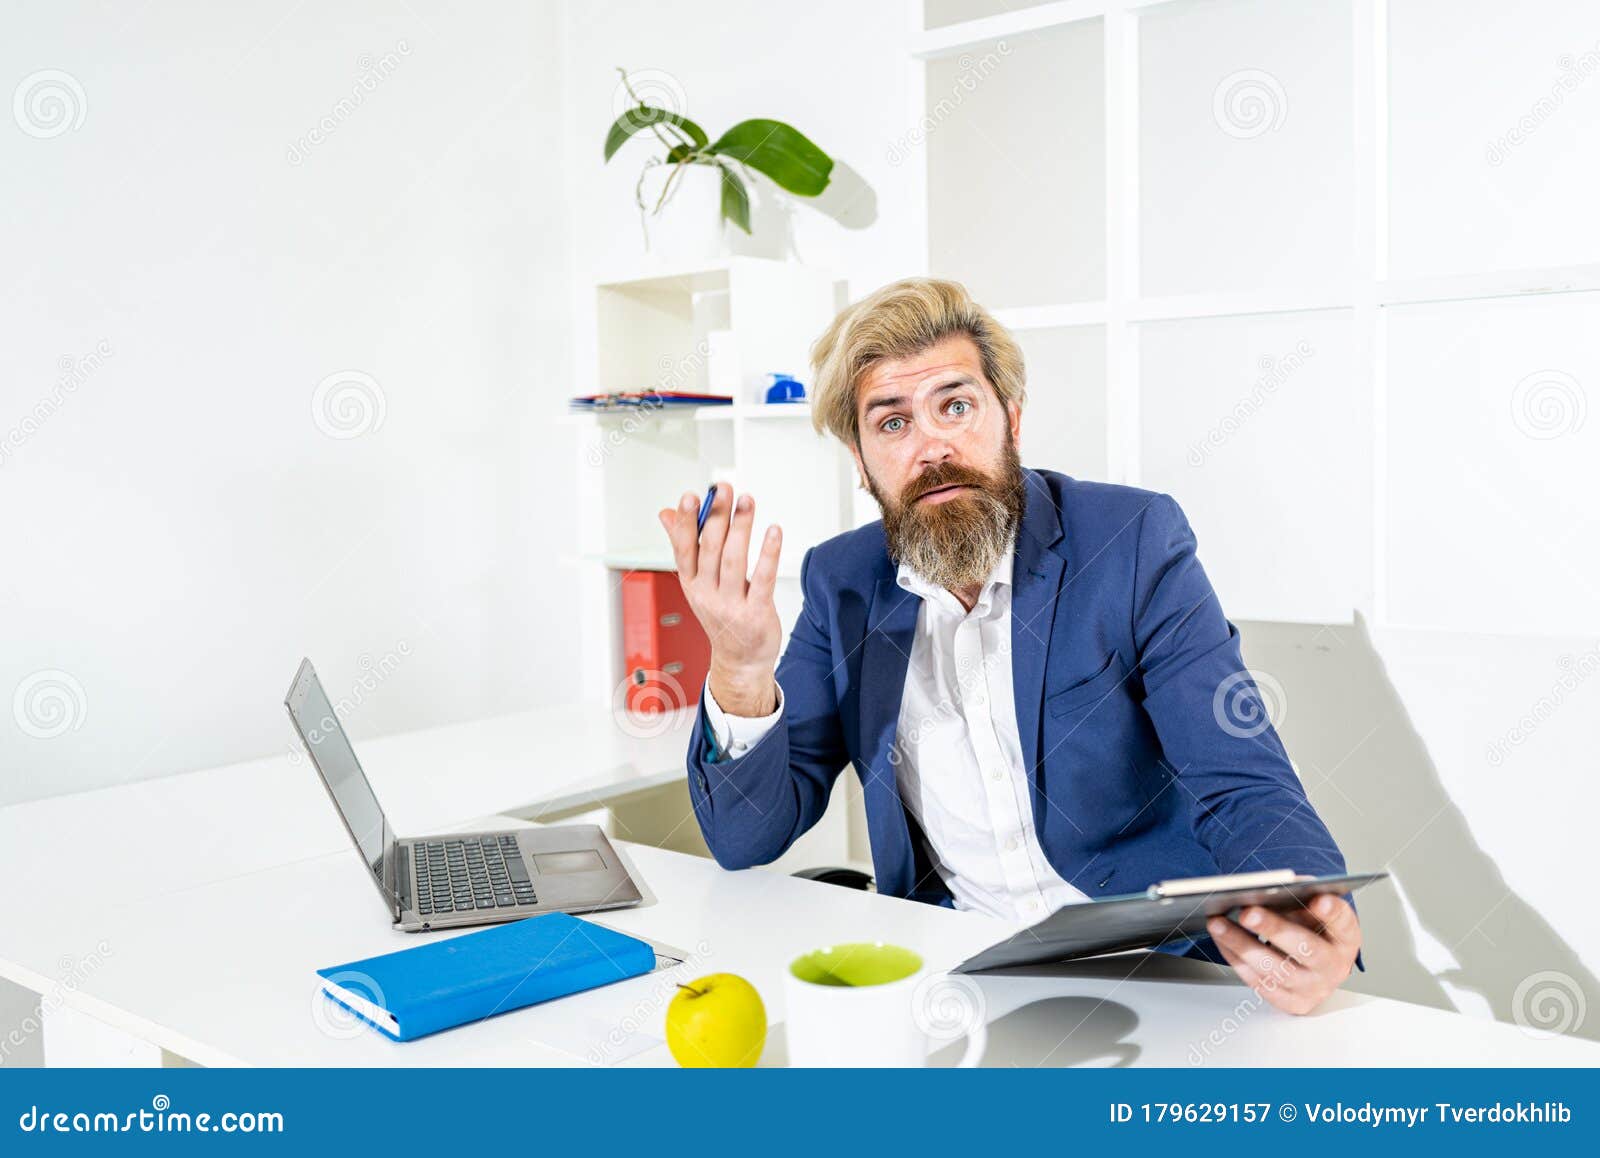 Boring Job Portrait Of Young Man Sitting At His Desk In The